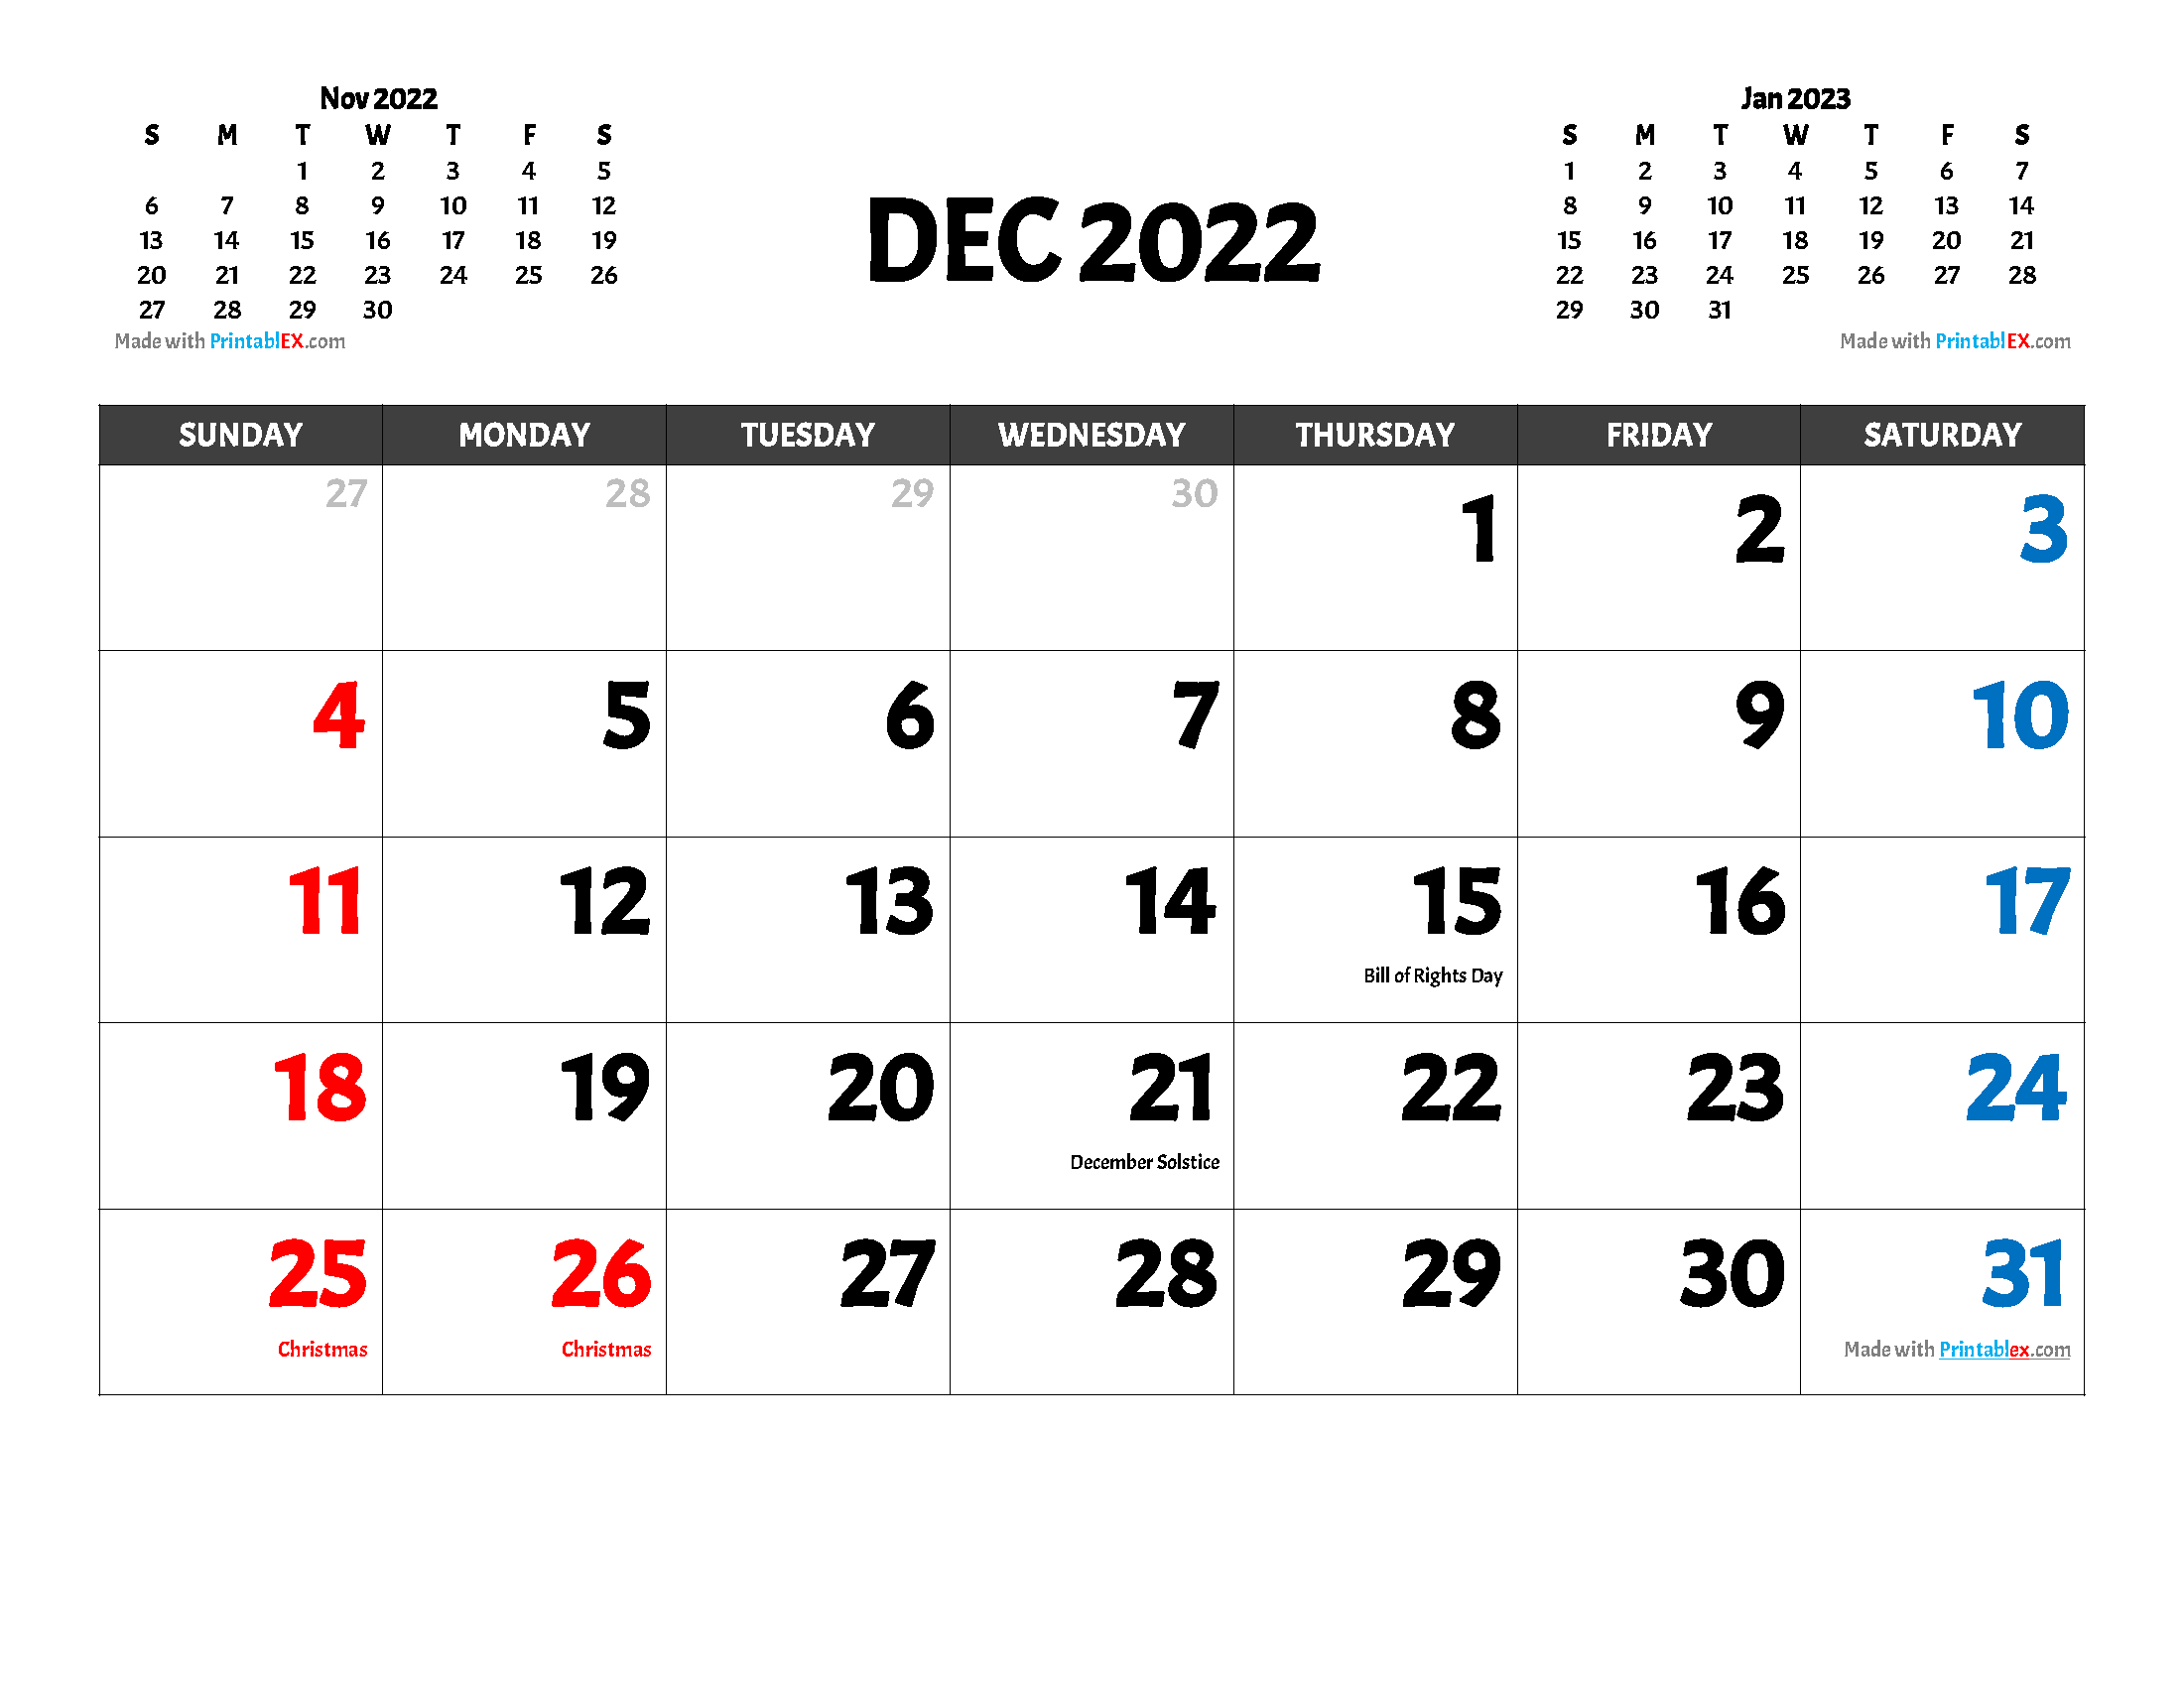 Free Printable December 2022 Calendar with holidays and observances in United States